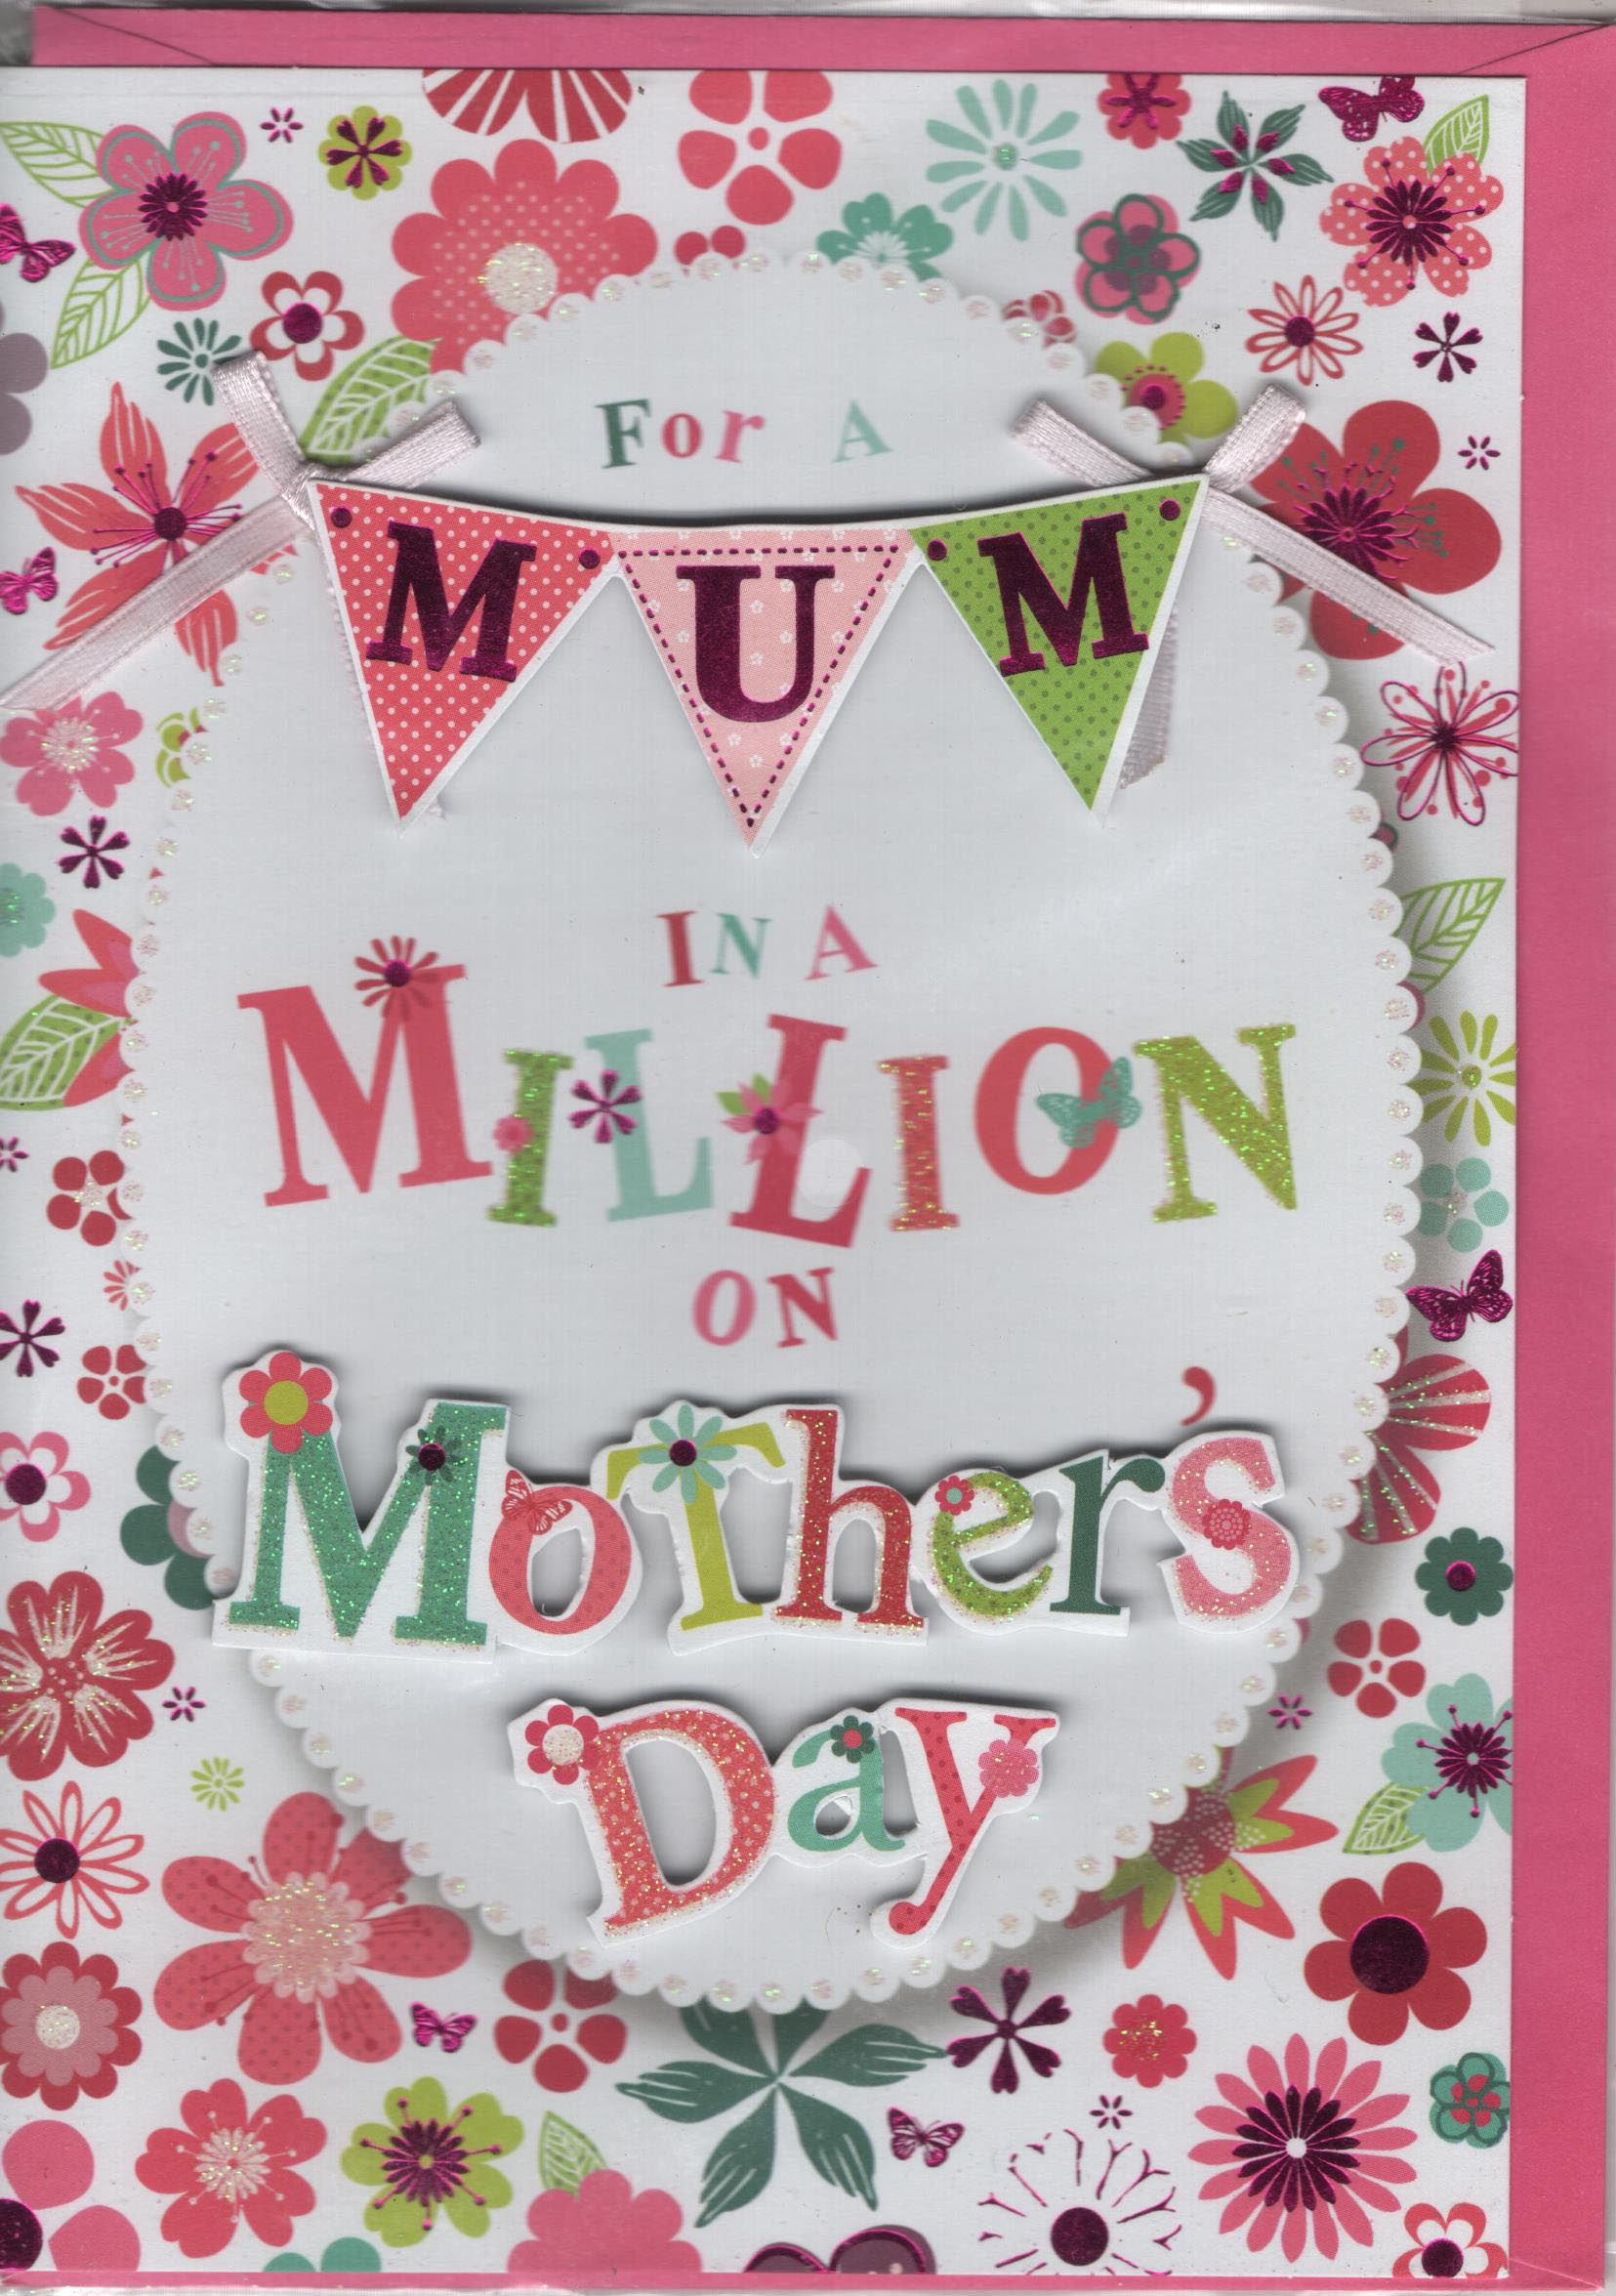 Isabels Graden : For A Mum in a Million on Mothers Day Greeting Card